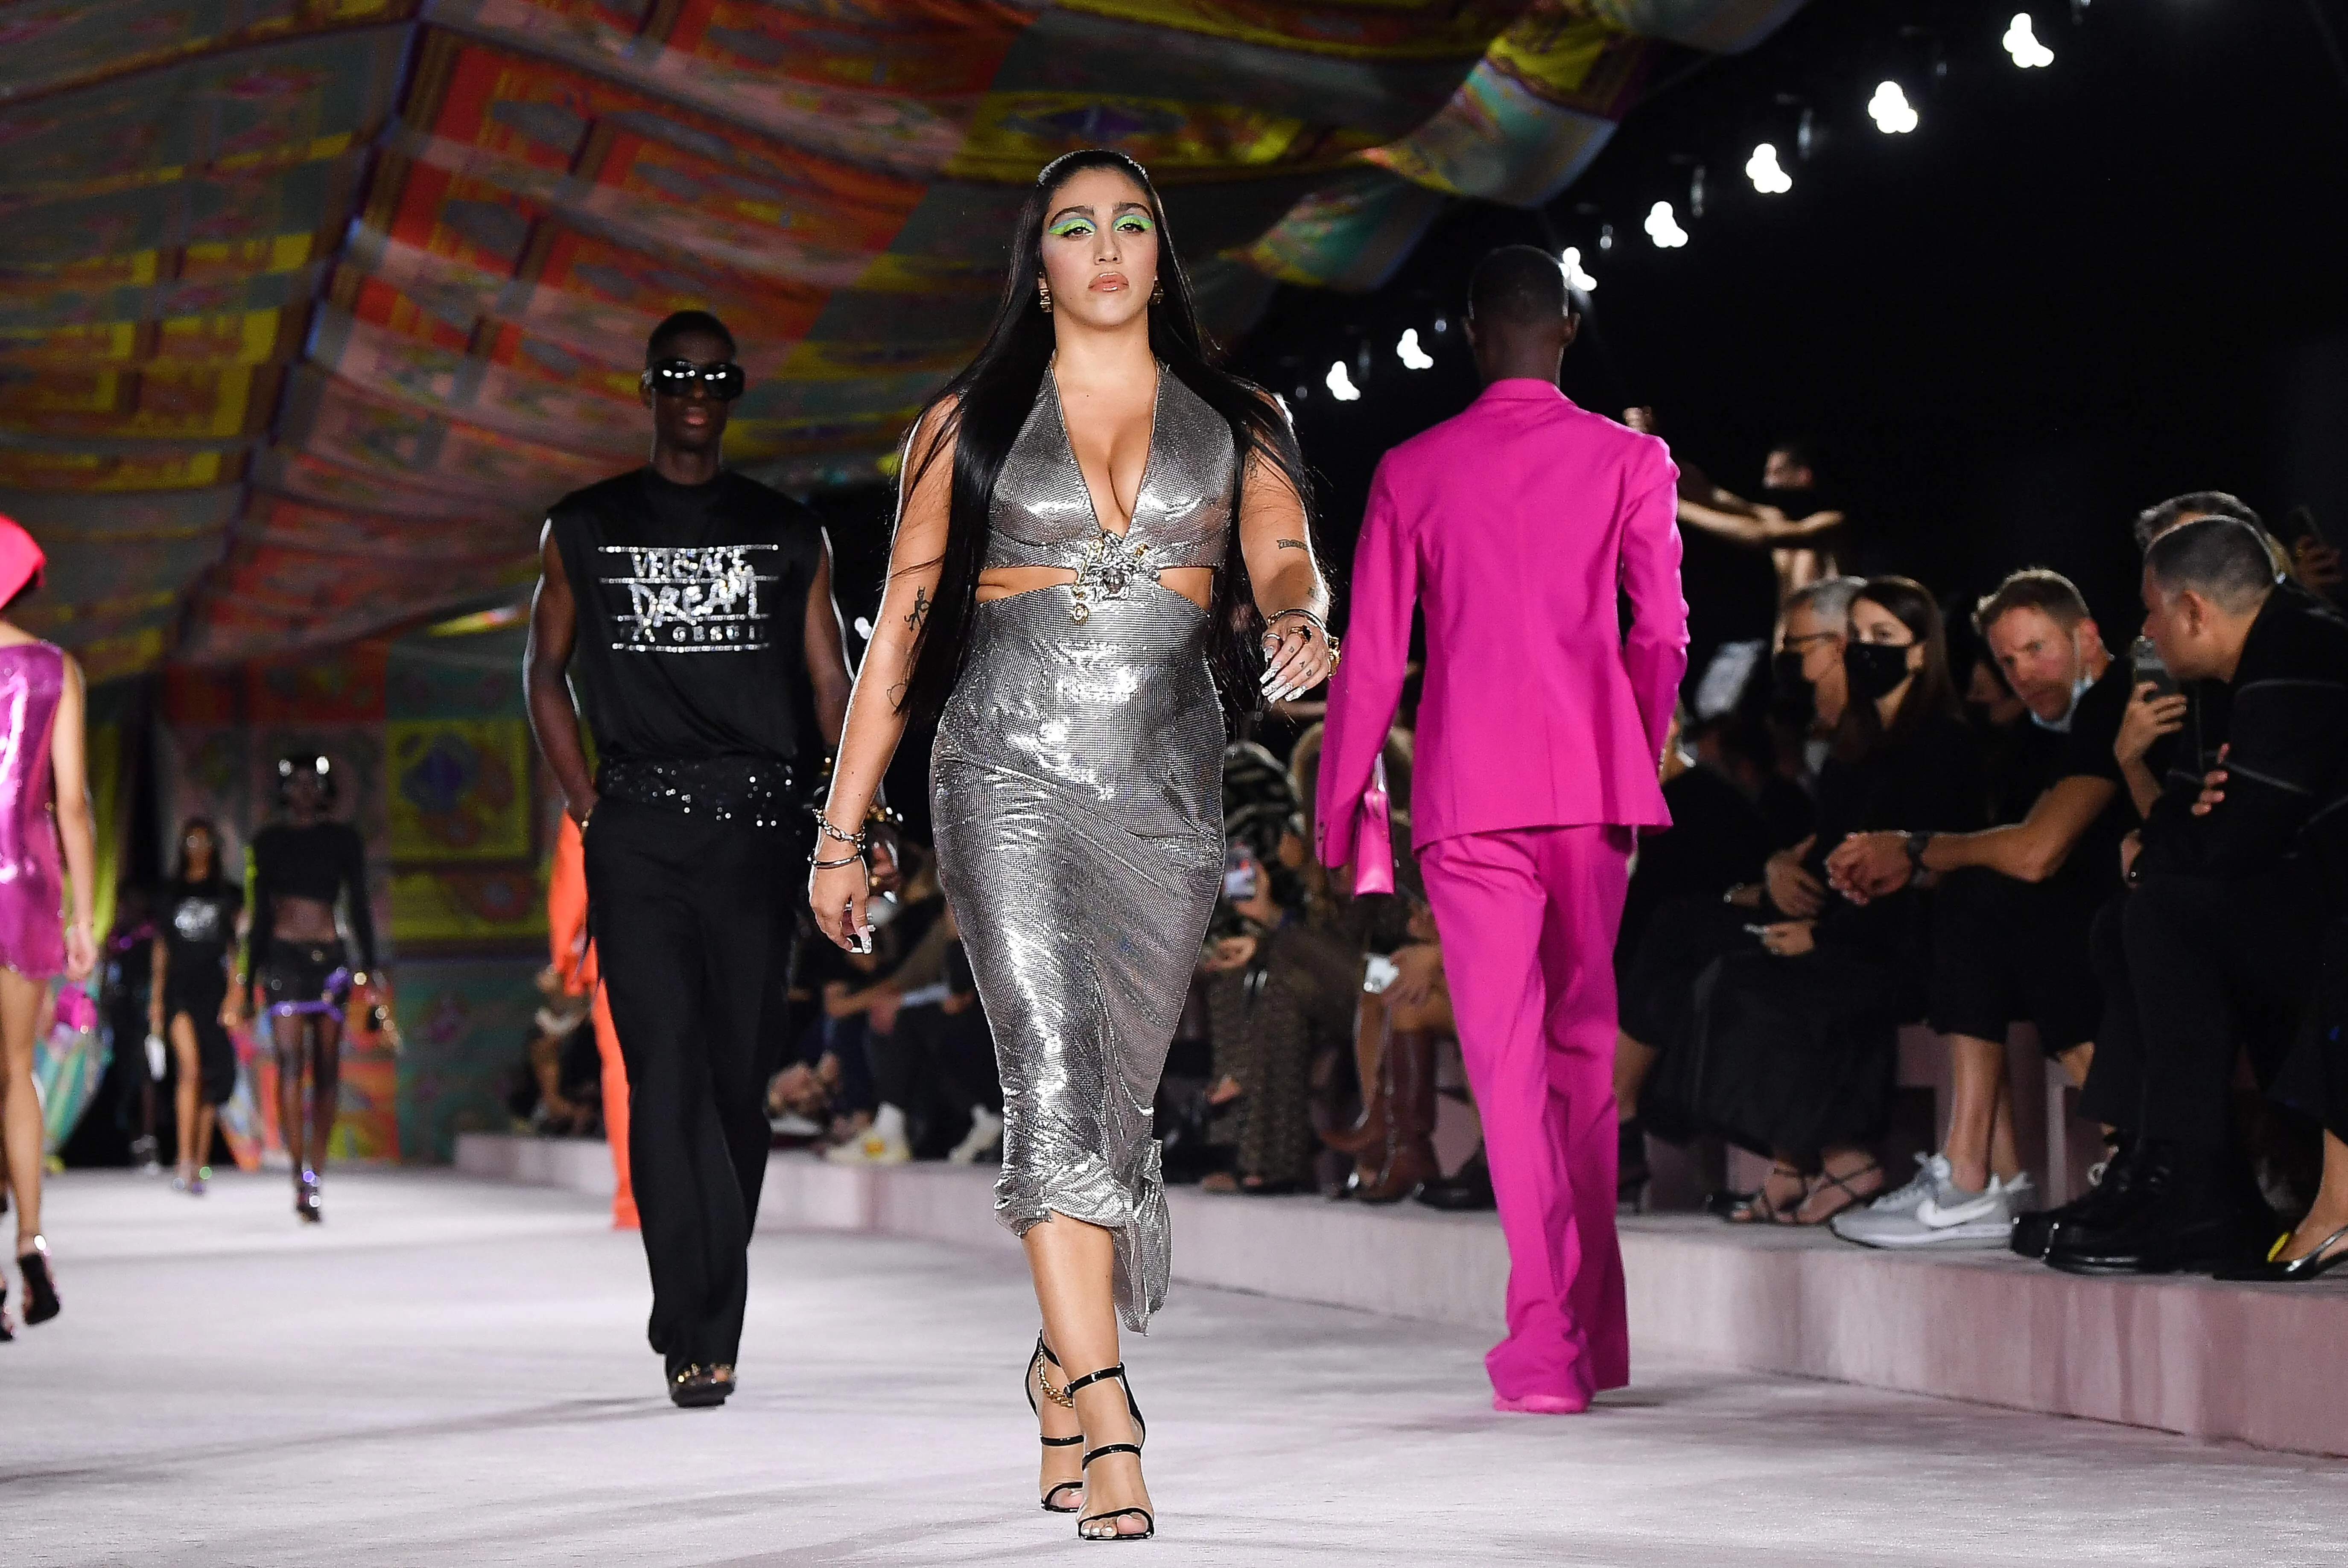 Madonna's daughter, Lourdes Leon, walks the runway at the Versace fashion show